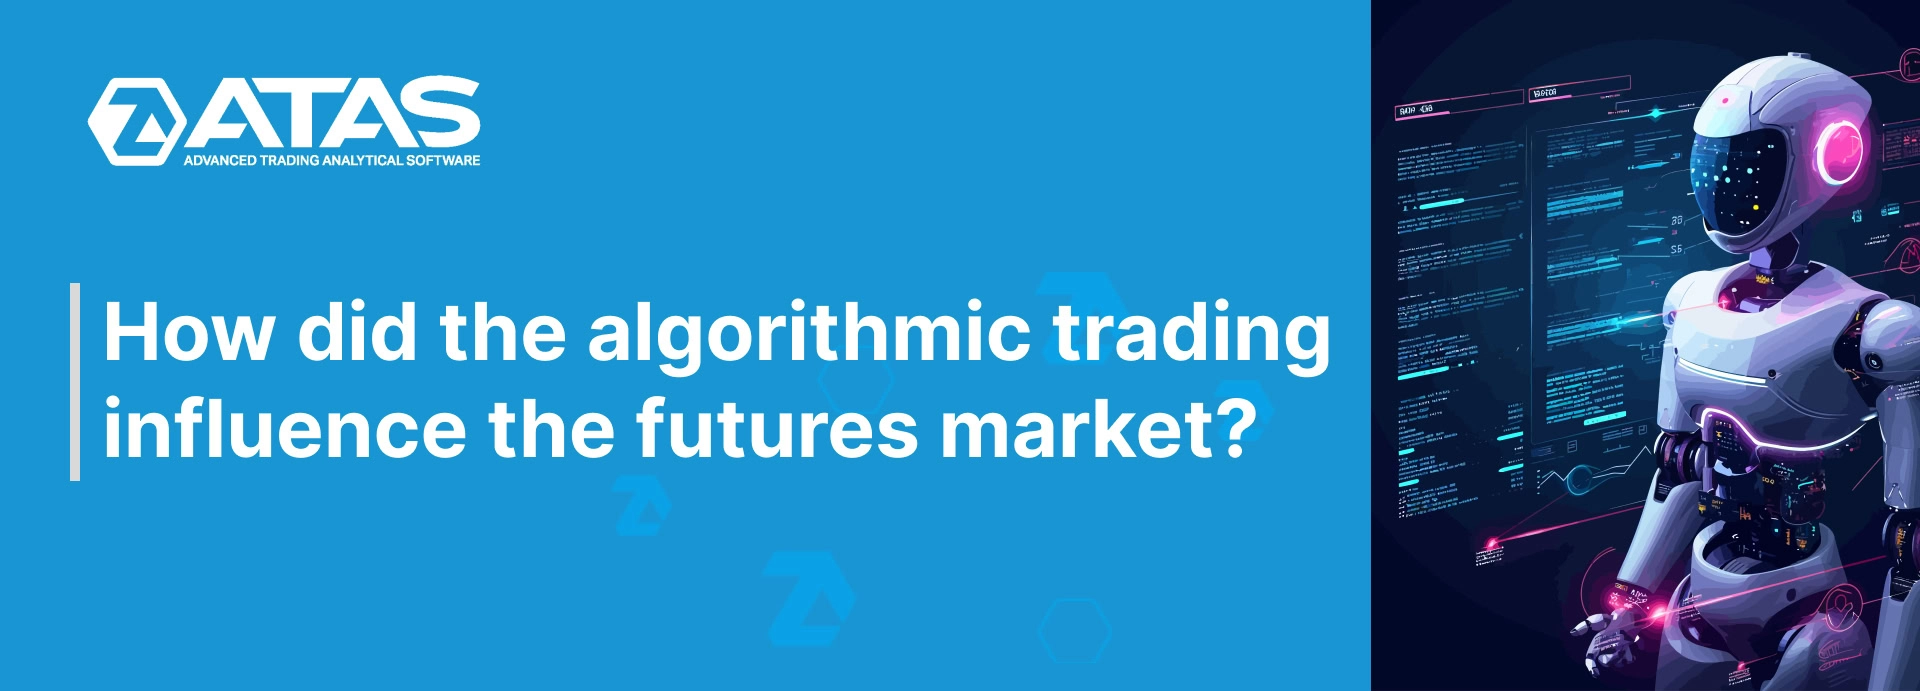 How did the algorithmic trading influence the futures market